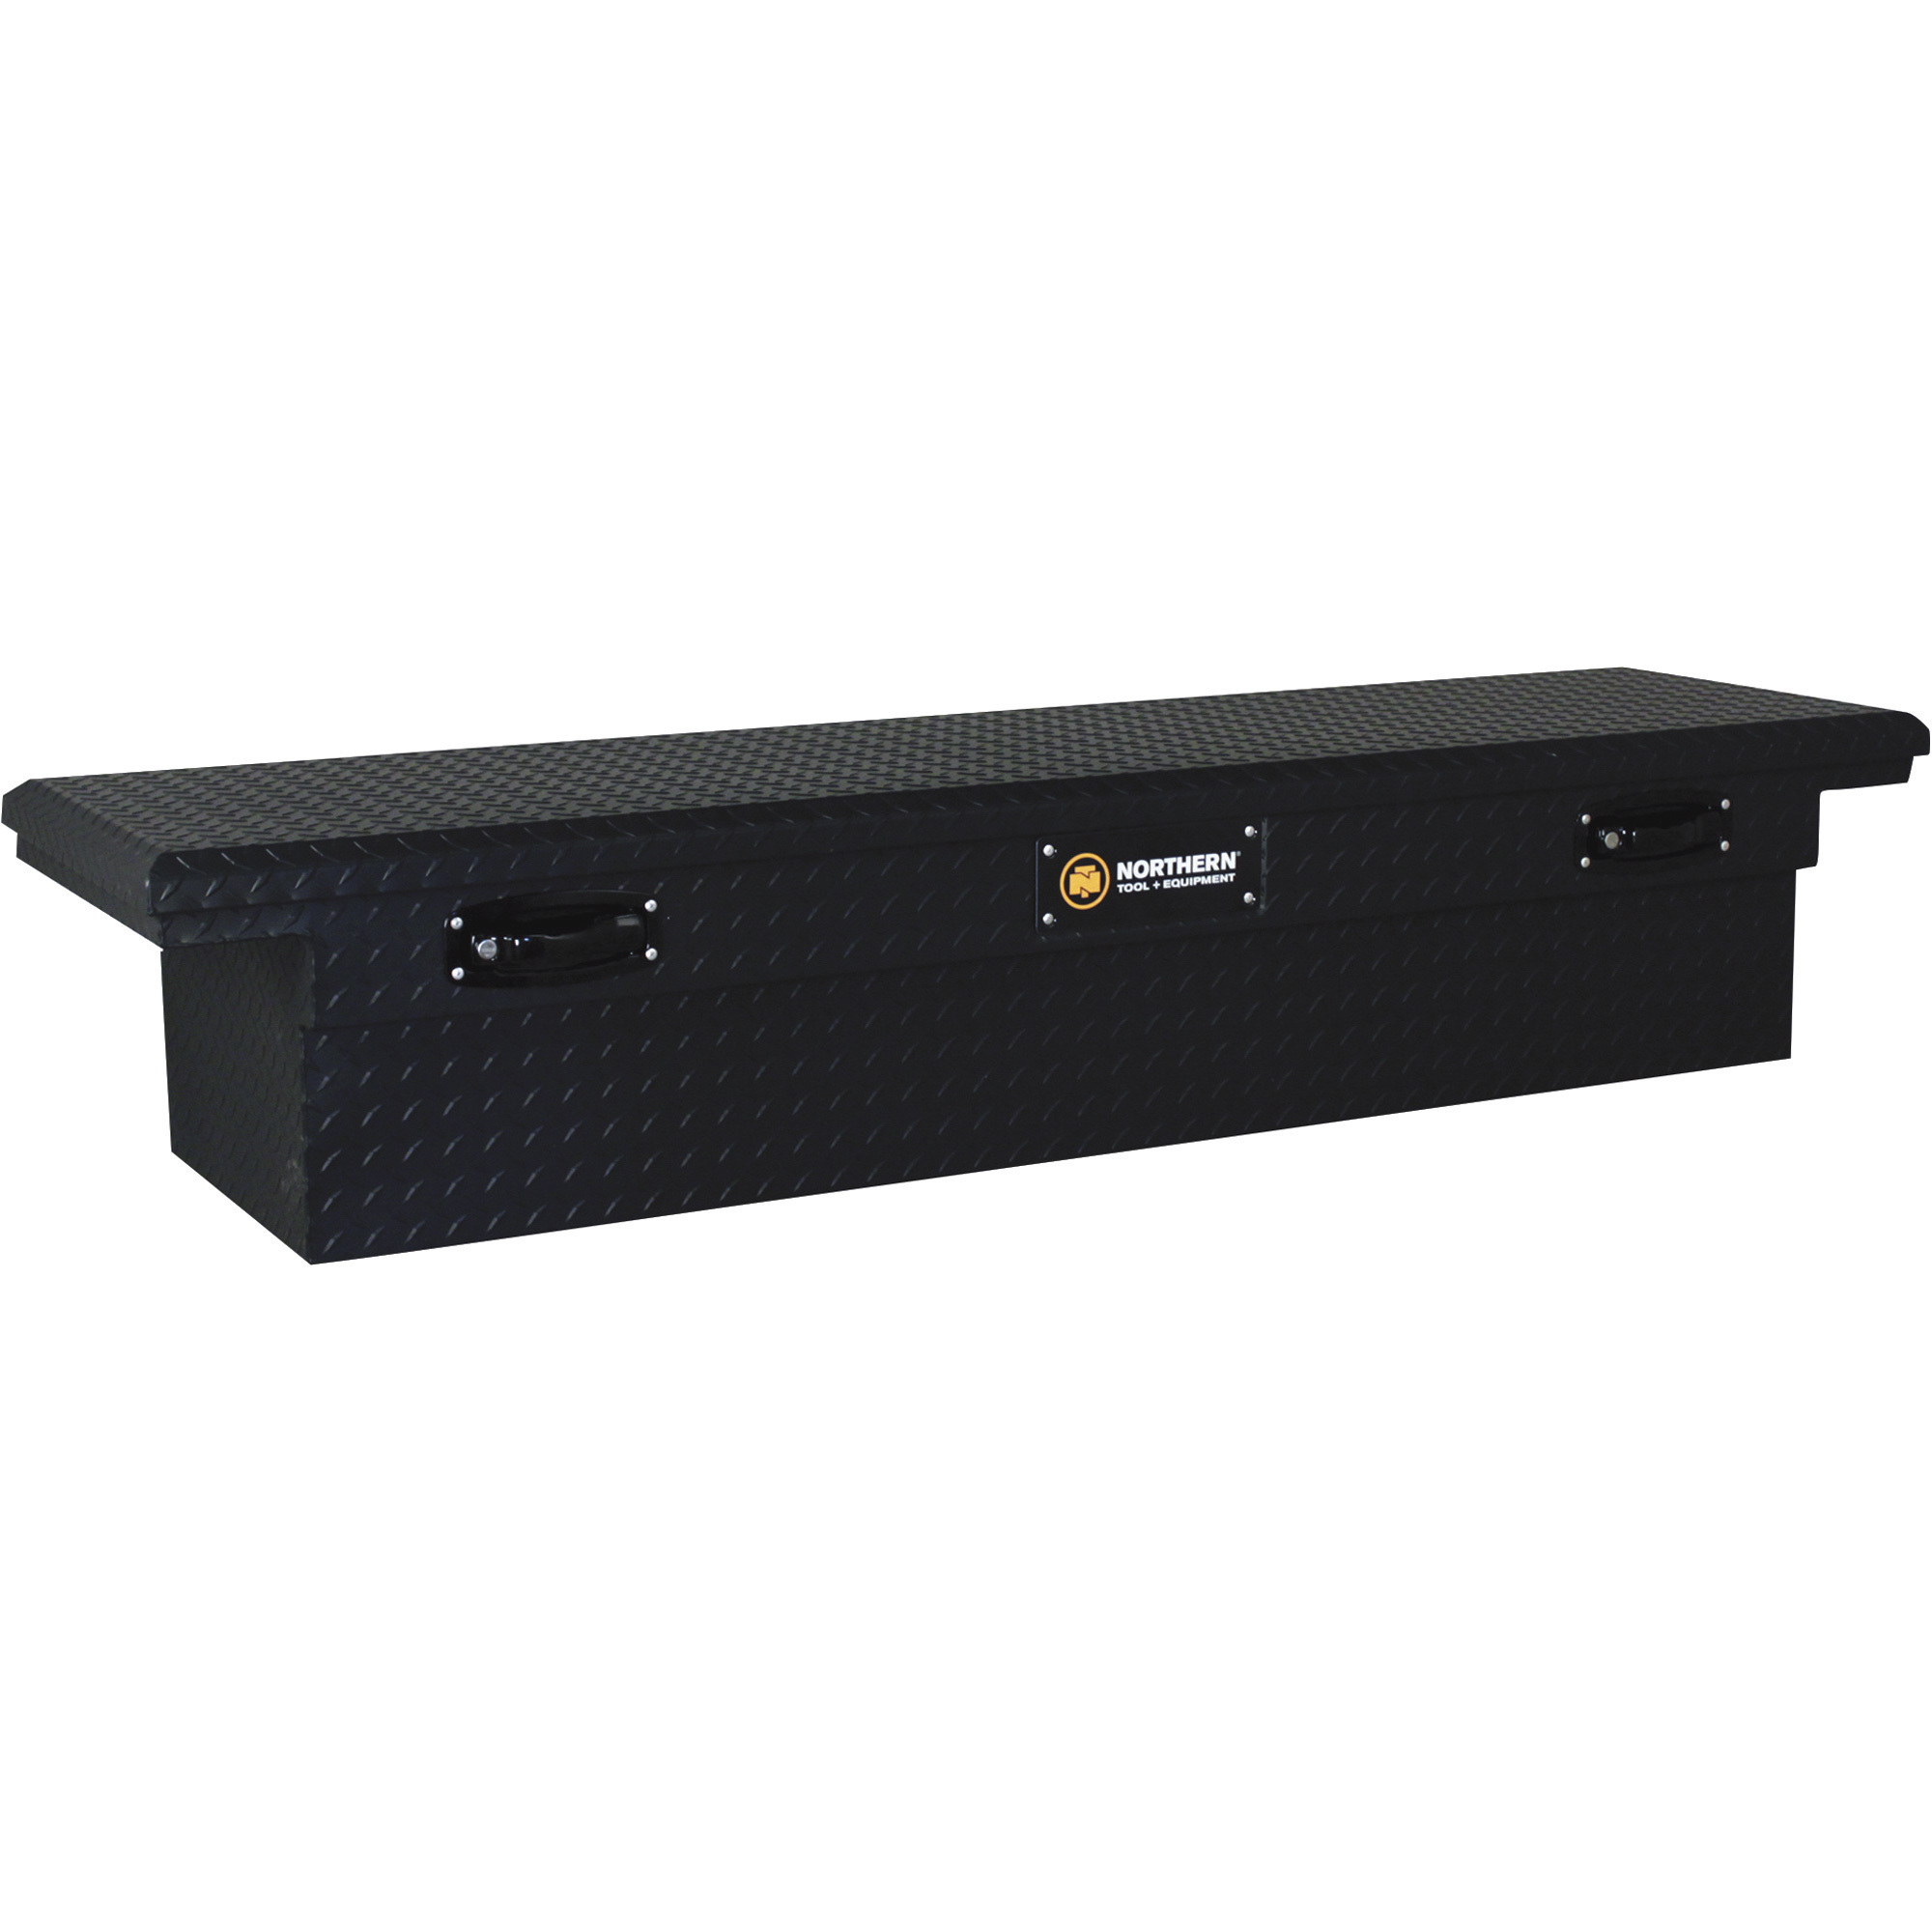 Northern Tool Low-Profile Crossover Truck Tool Box with Removable Tray, Aluminum, Textured Matte Black, Pull Handle Latches, 69Inch x 20Inch x 13Inch,